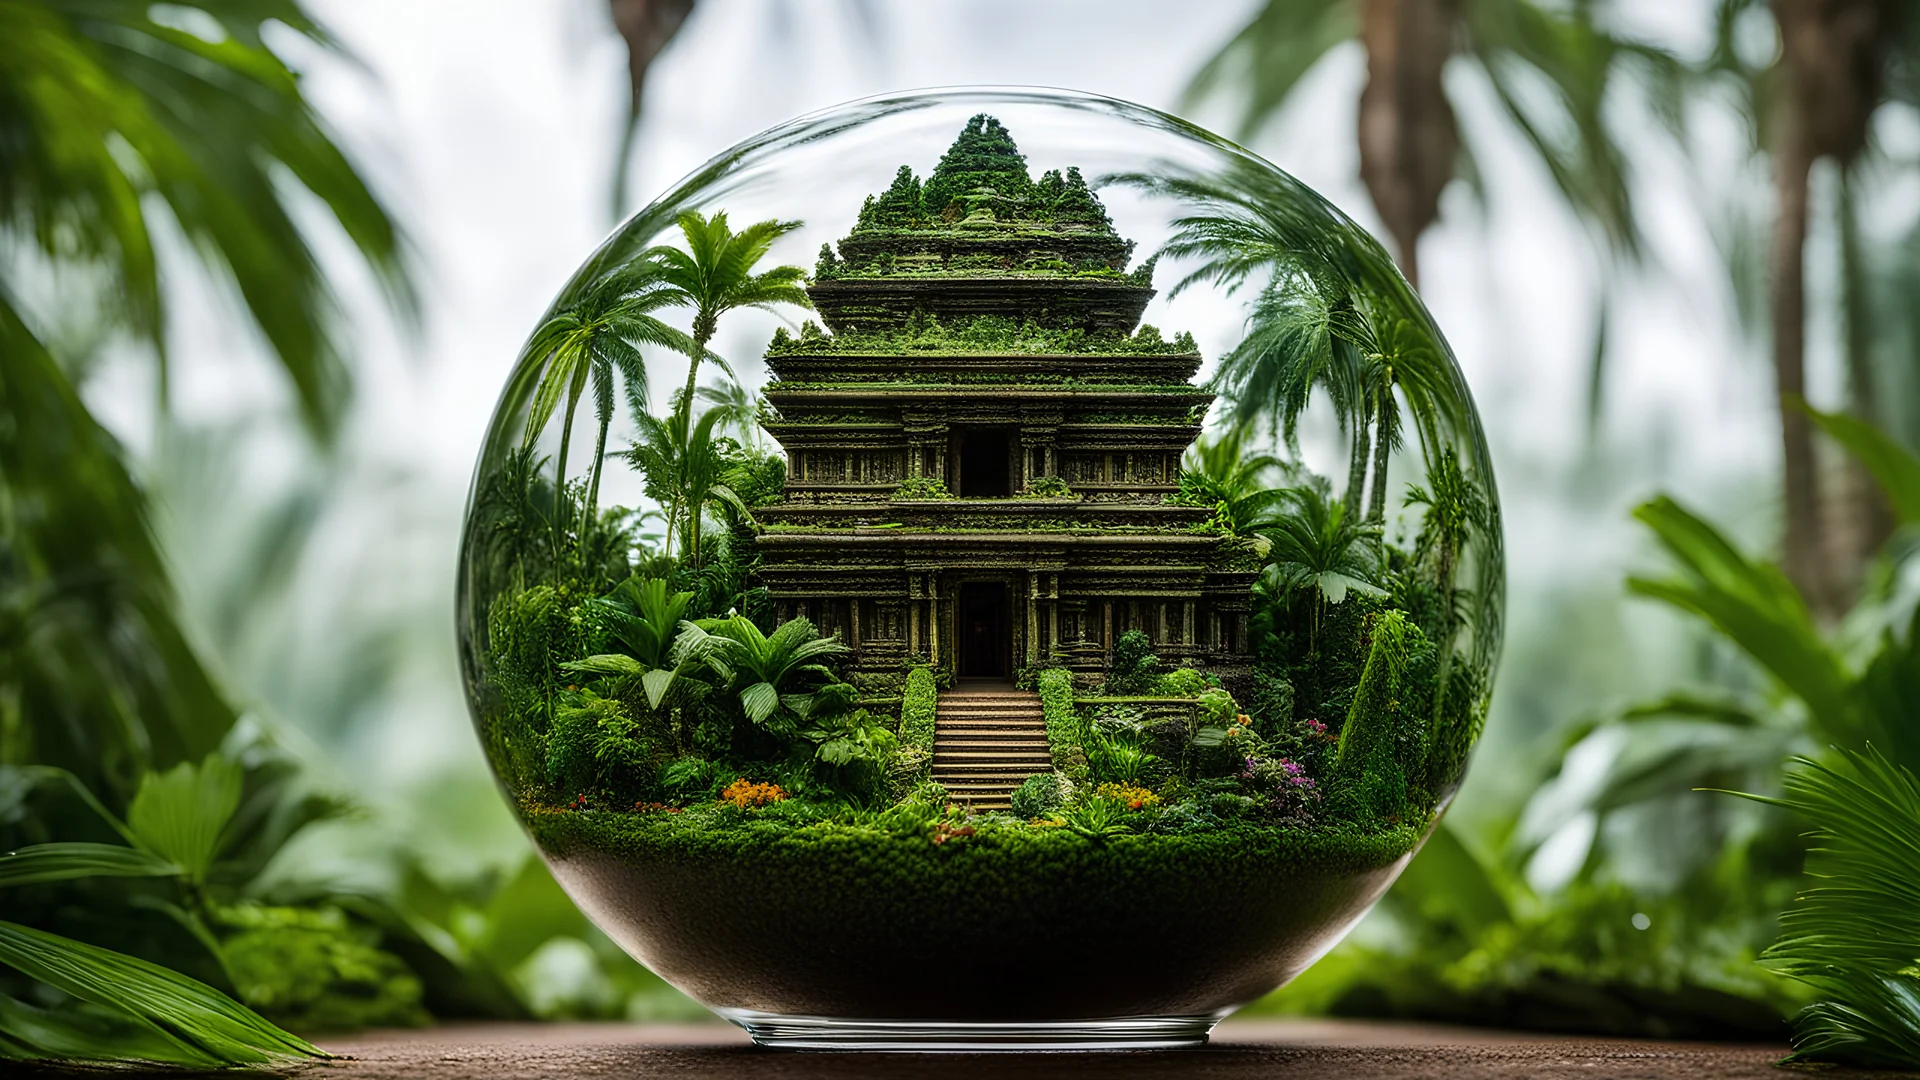 The miniatur temple aztec in jungle palms in ball glass is an abstract concept that refers to a world made entirely of flowers or plants, often in a fantasy or mythical setting. The flower planet in this image appears to be a baroque world, with ornate spiral patterns and intricate designs.